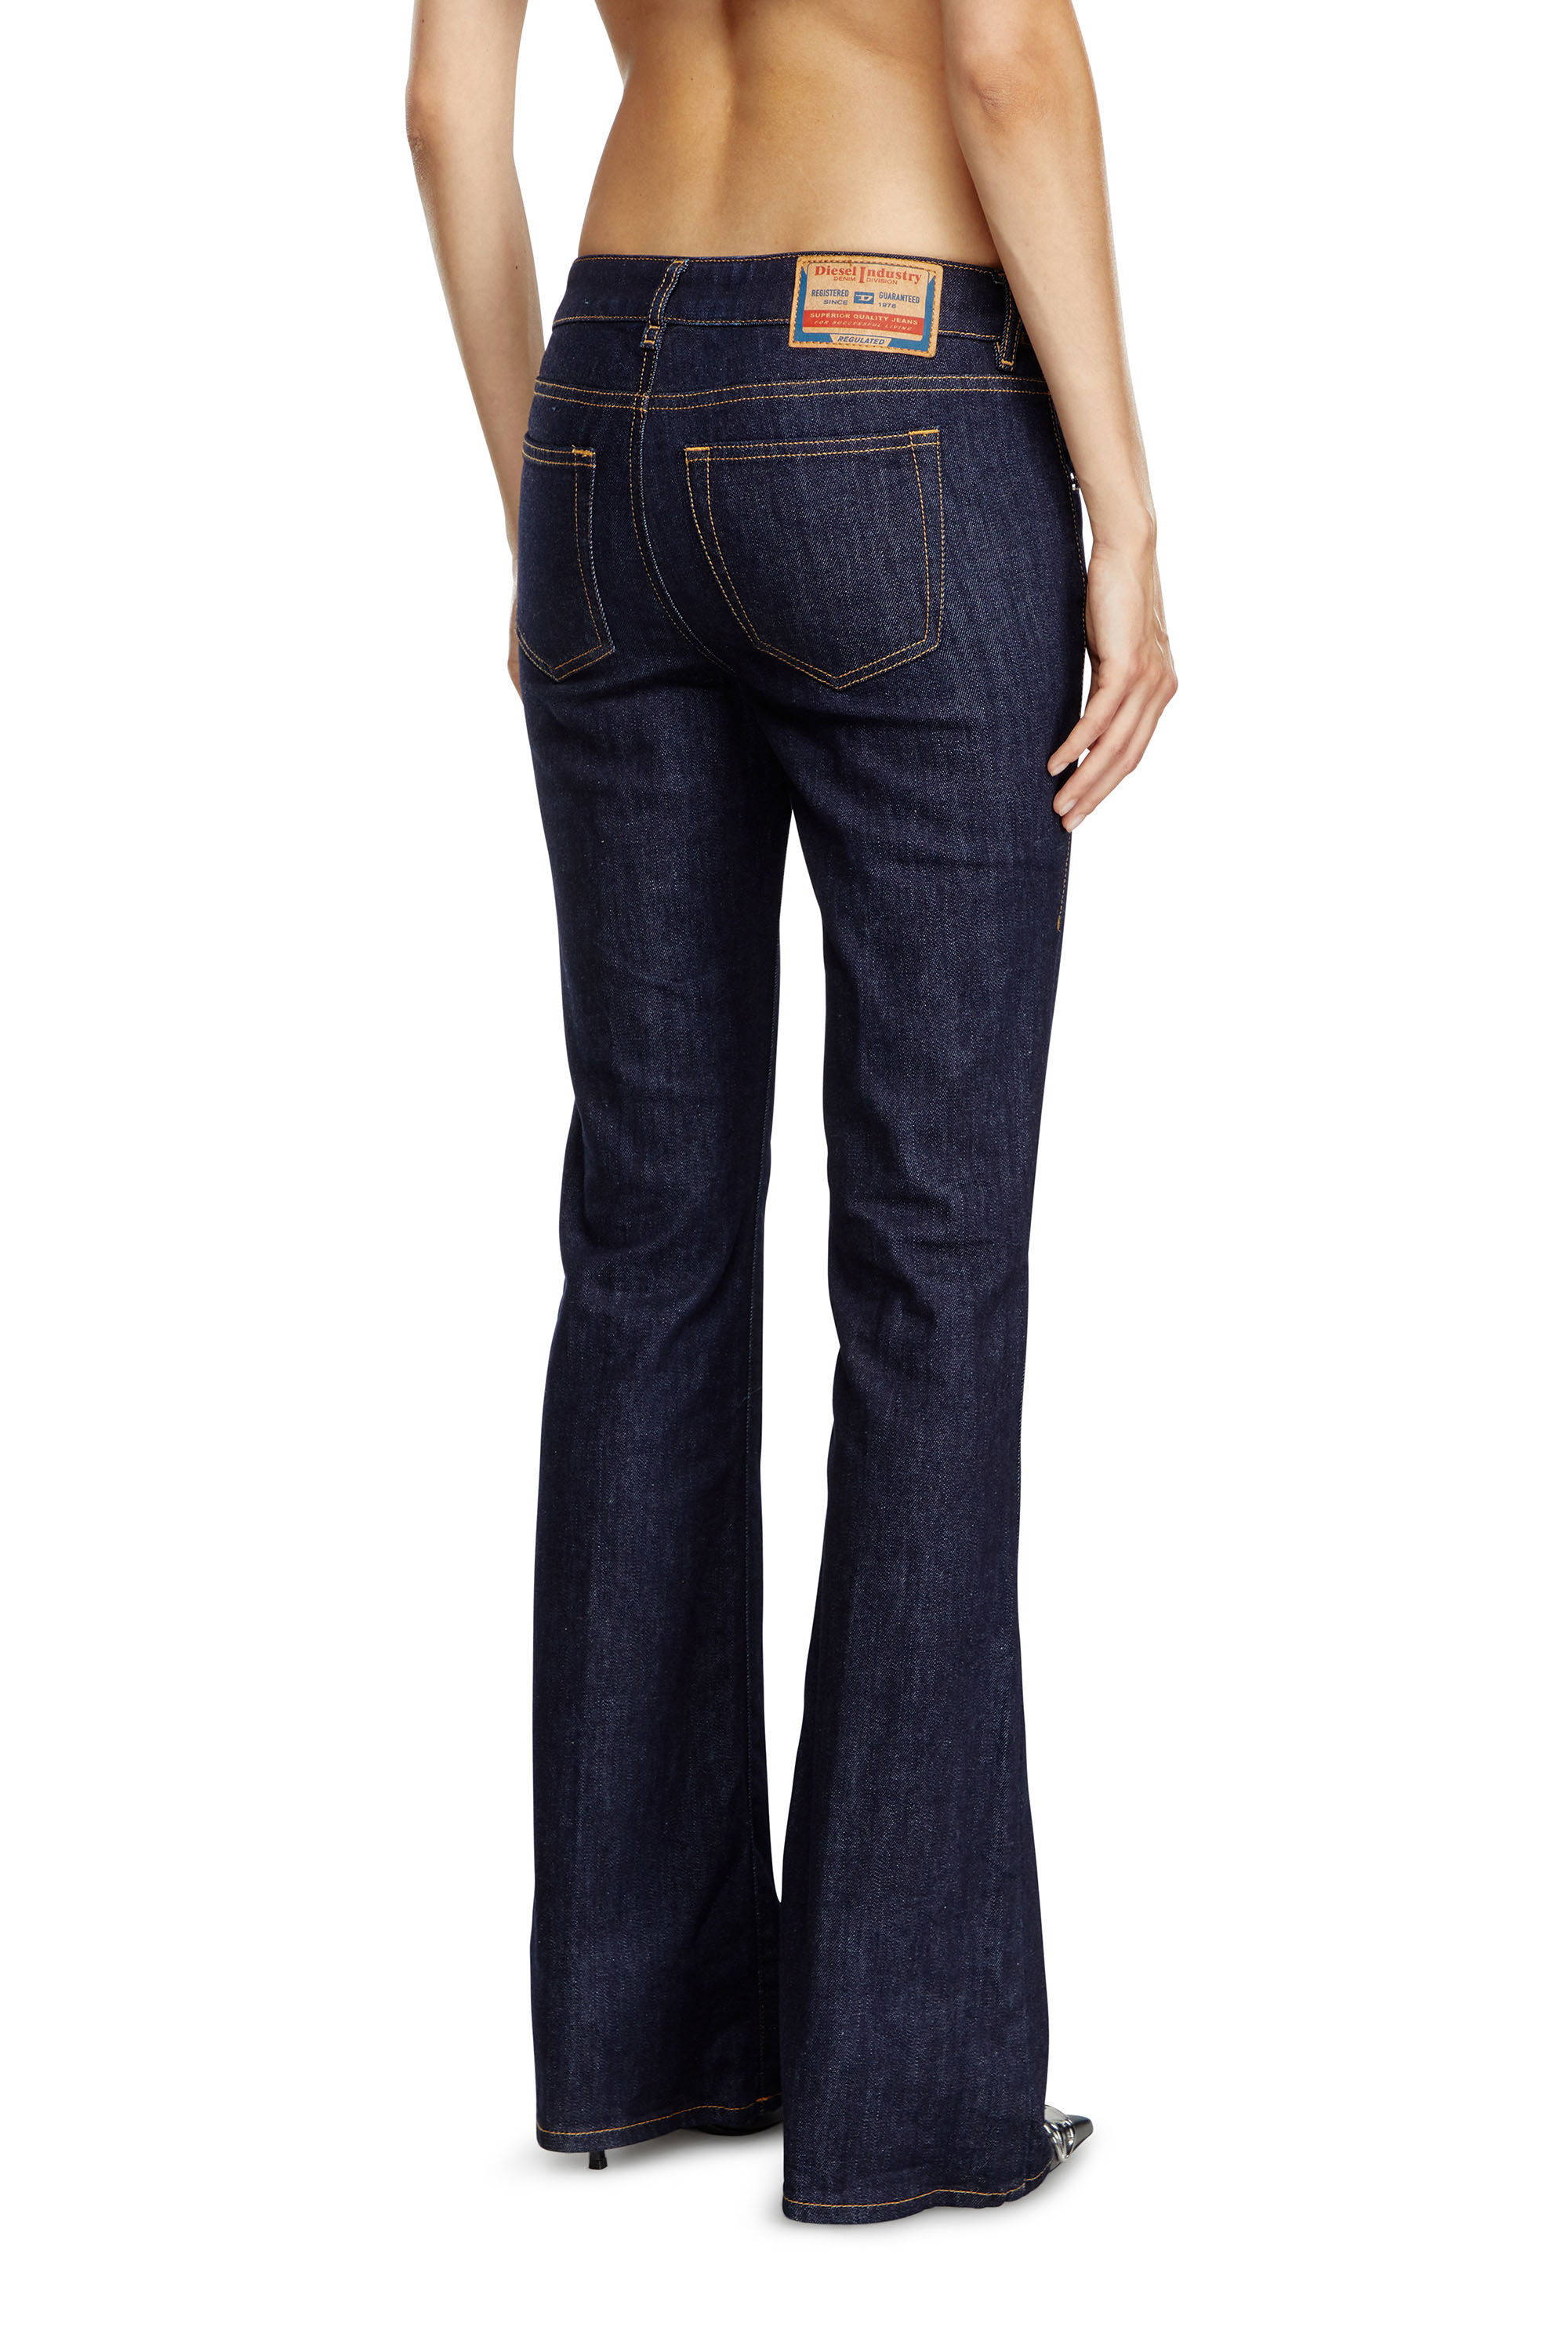 Diesel - Bootcut and Flare Jeans 1969 D-Ebbey Z9B89, Mujer Bootcut y Flare Jeans - 1969 D-Ebbey in Azul marino - Image 5